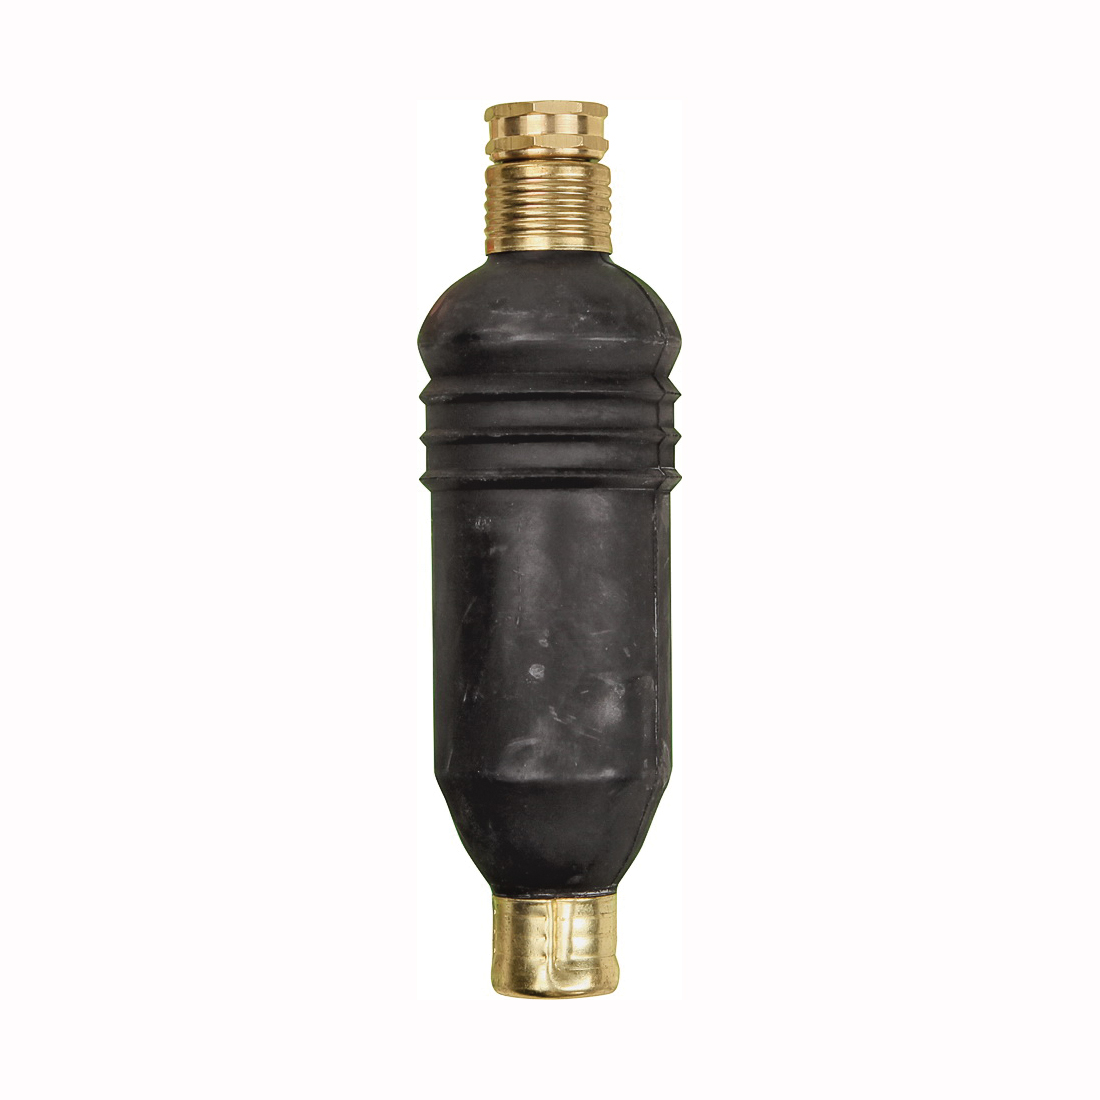 750 Drain Opener/Cleaner, 50 to 80 psi Pressure, 3 to 6 in Drain